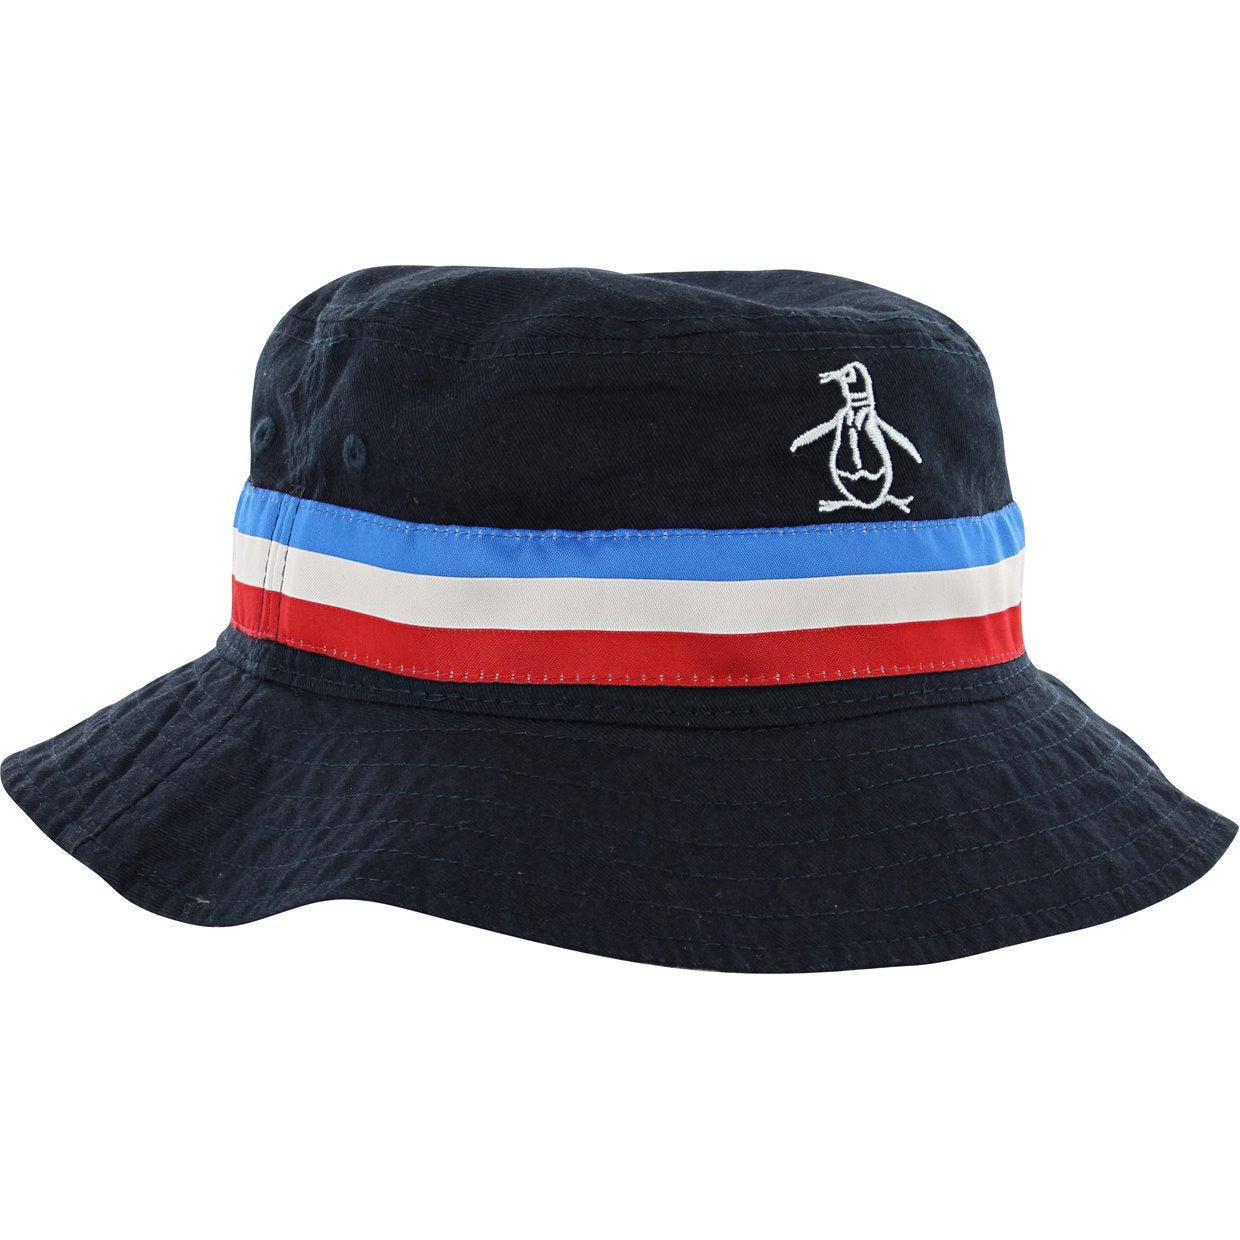 Give your baseball caps a break and try one of these 6 trendy bucket hats